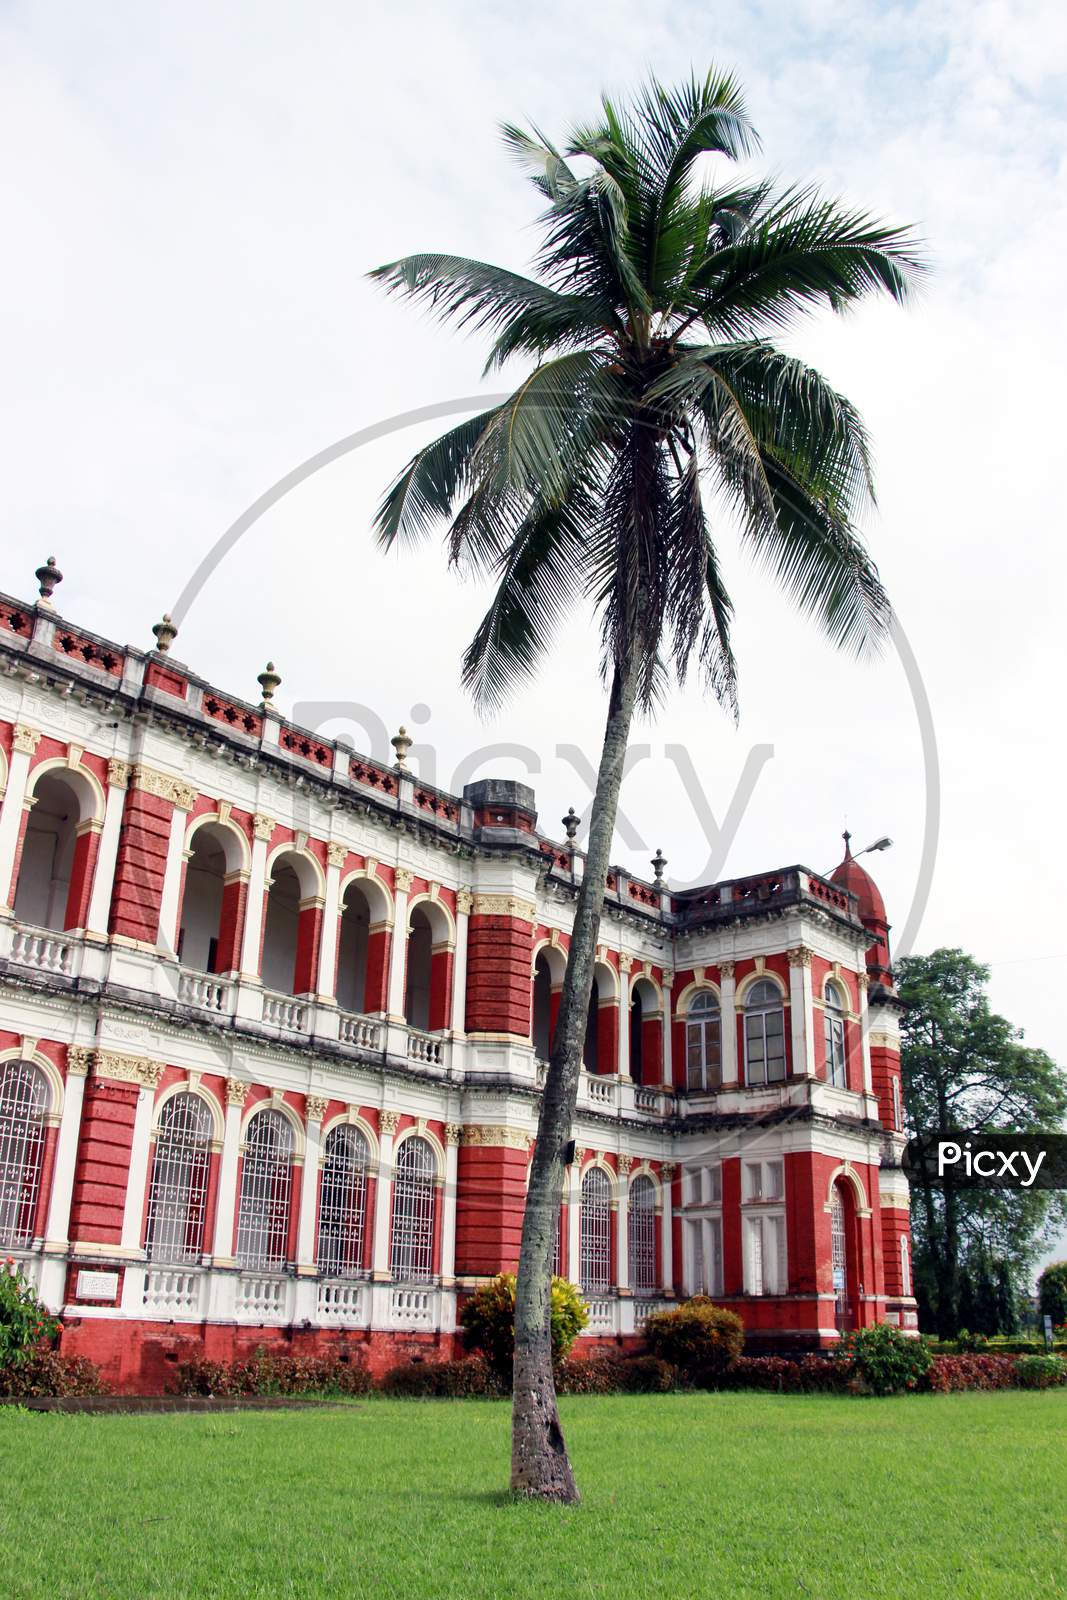 Cooch Behar Palace, also called the Victor Jubilee Palace. Ancient, classic. Cooch Behar Rajbari